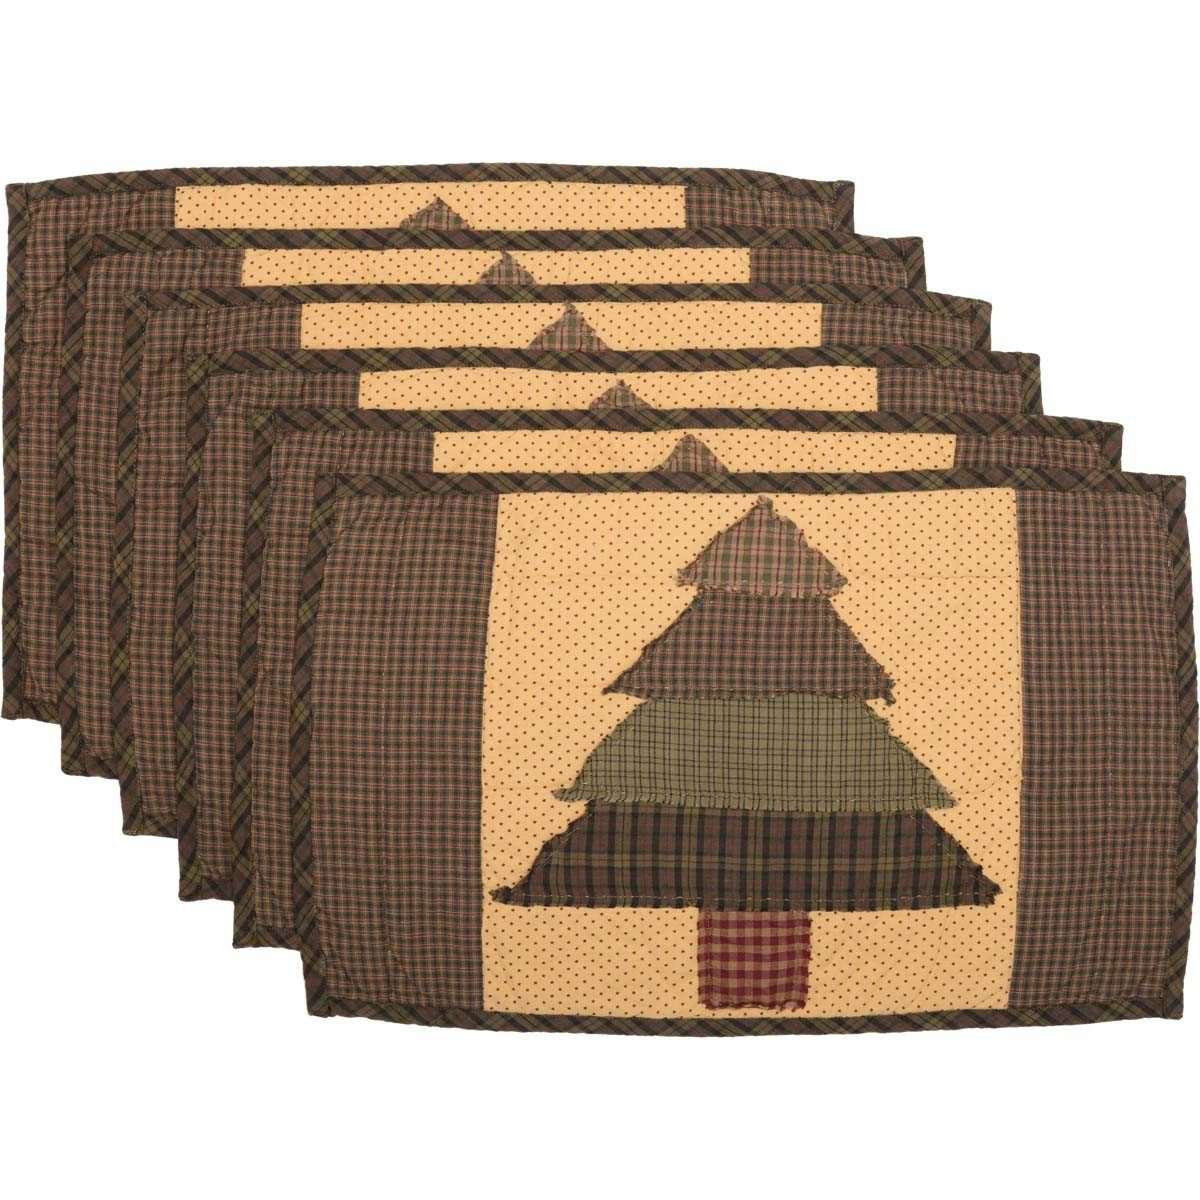 Sequoia Quilted Placemat Set of 6 - The Fox Decor